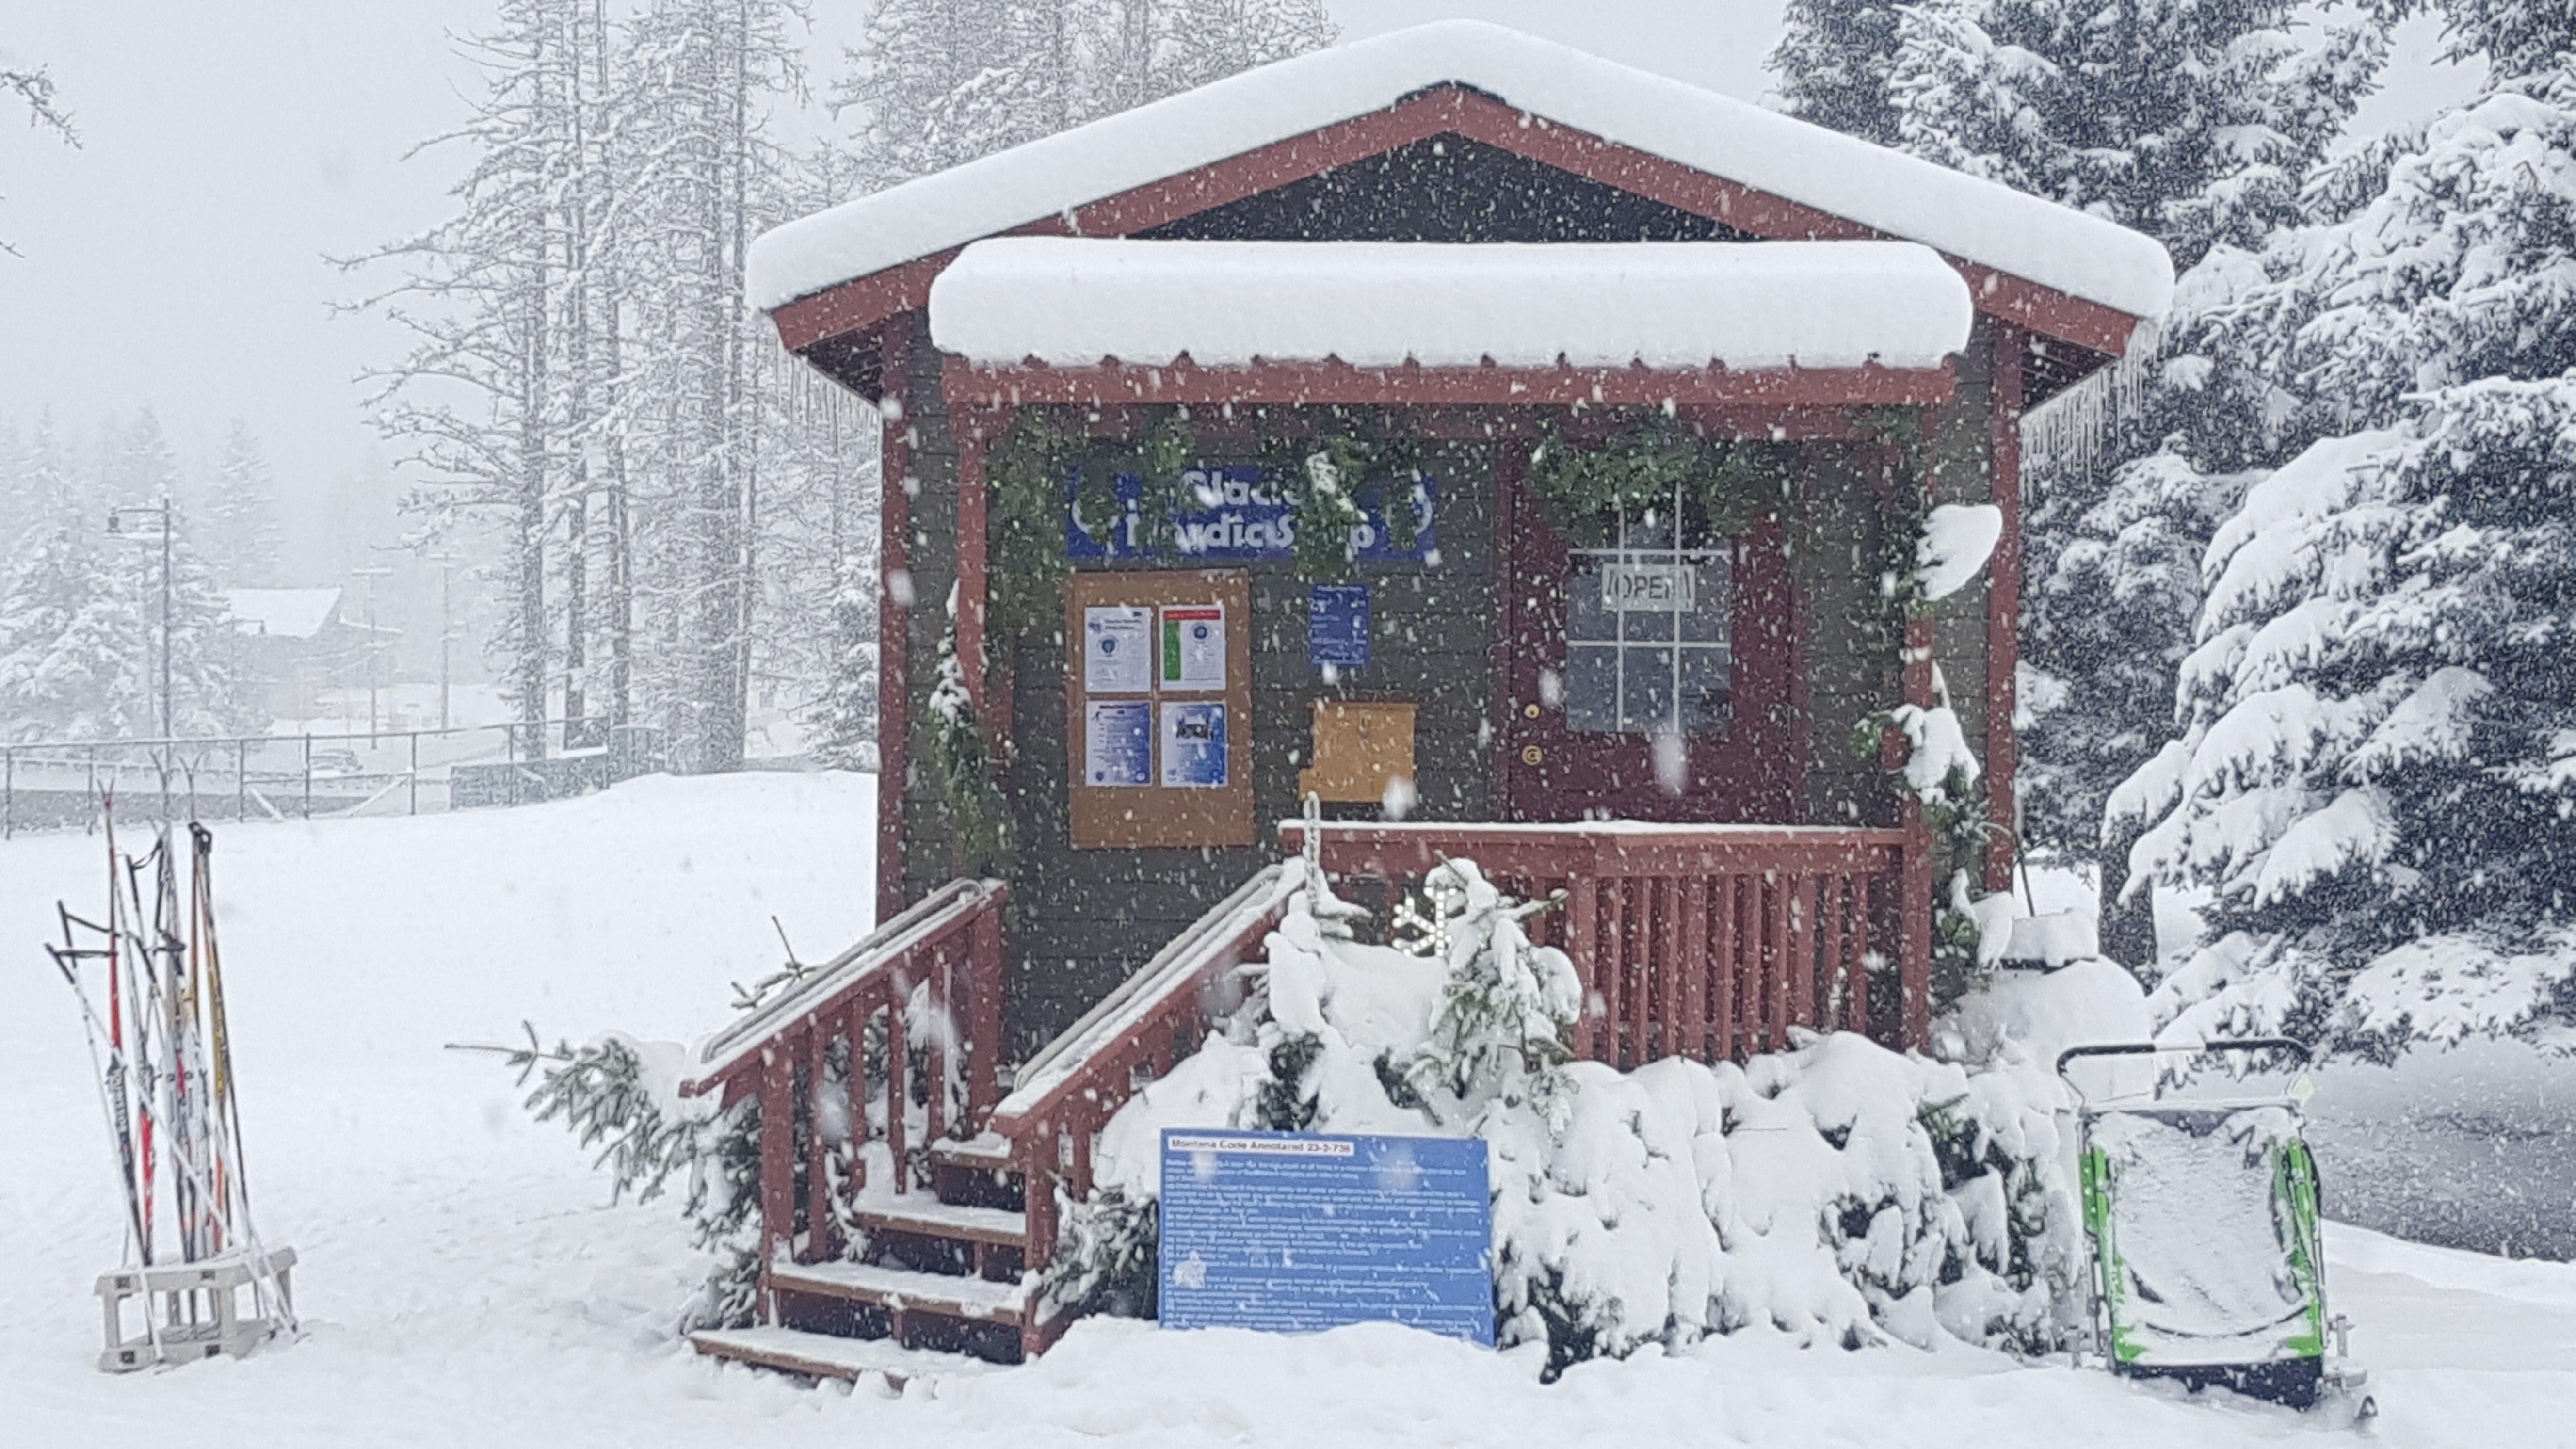 Glacier Nordic Shop at the Whitefish Lake Golf Course